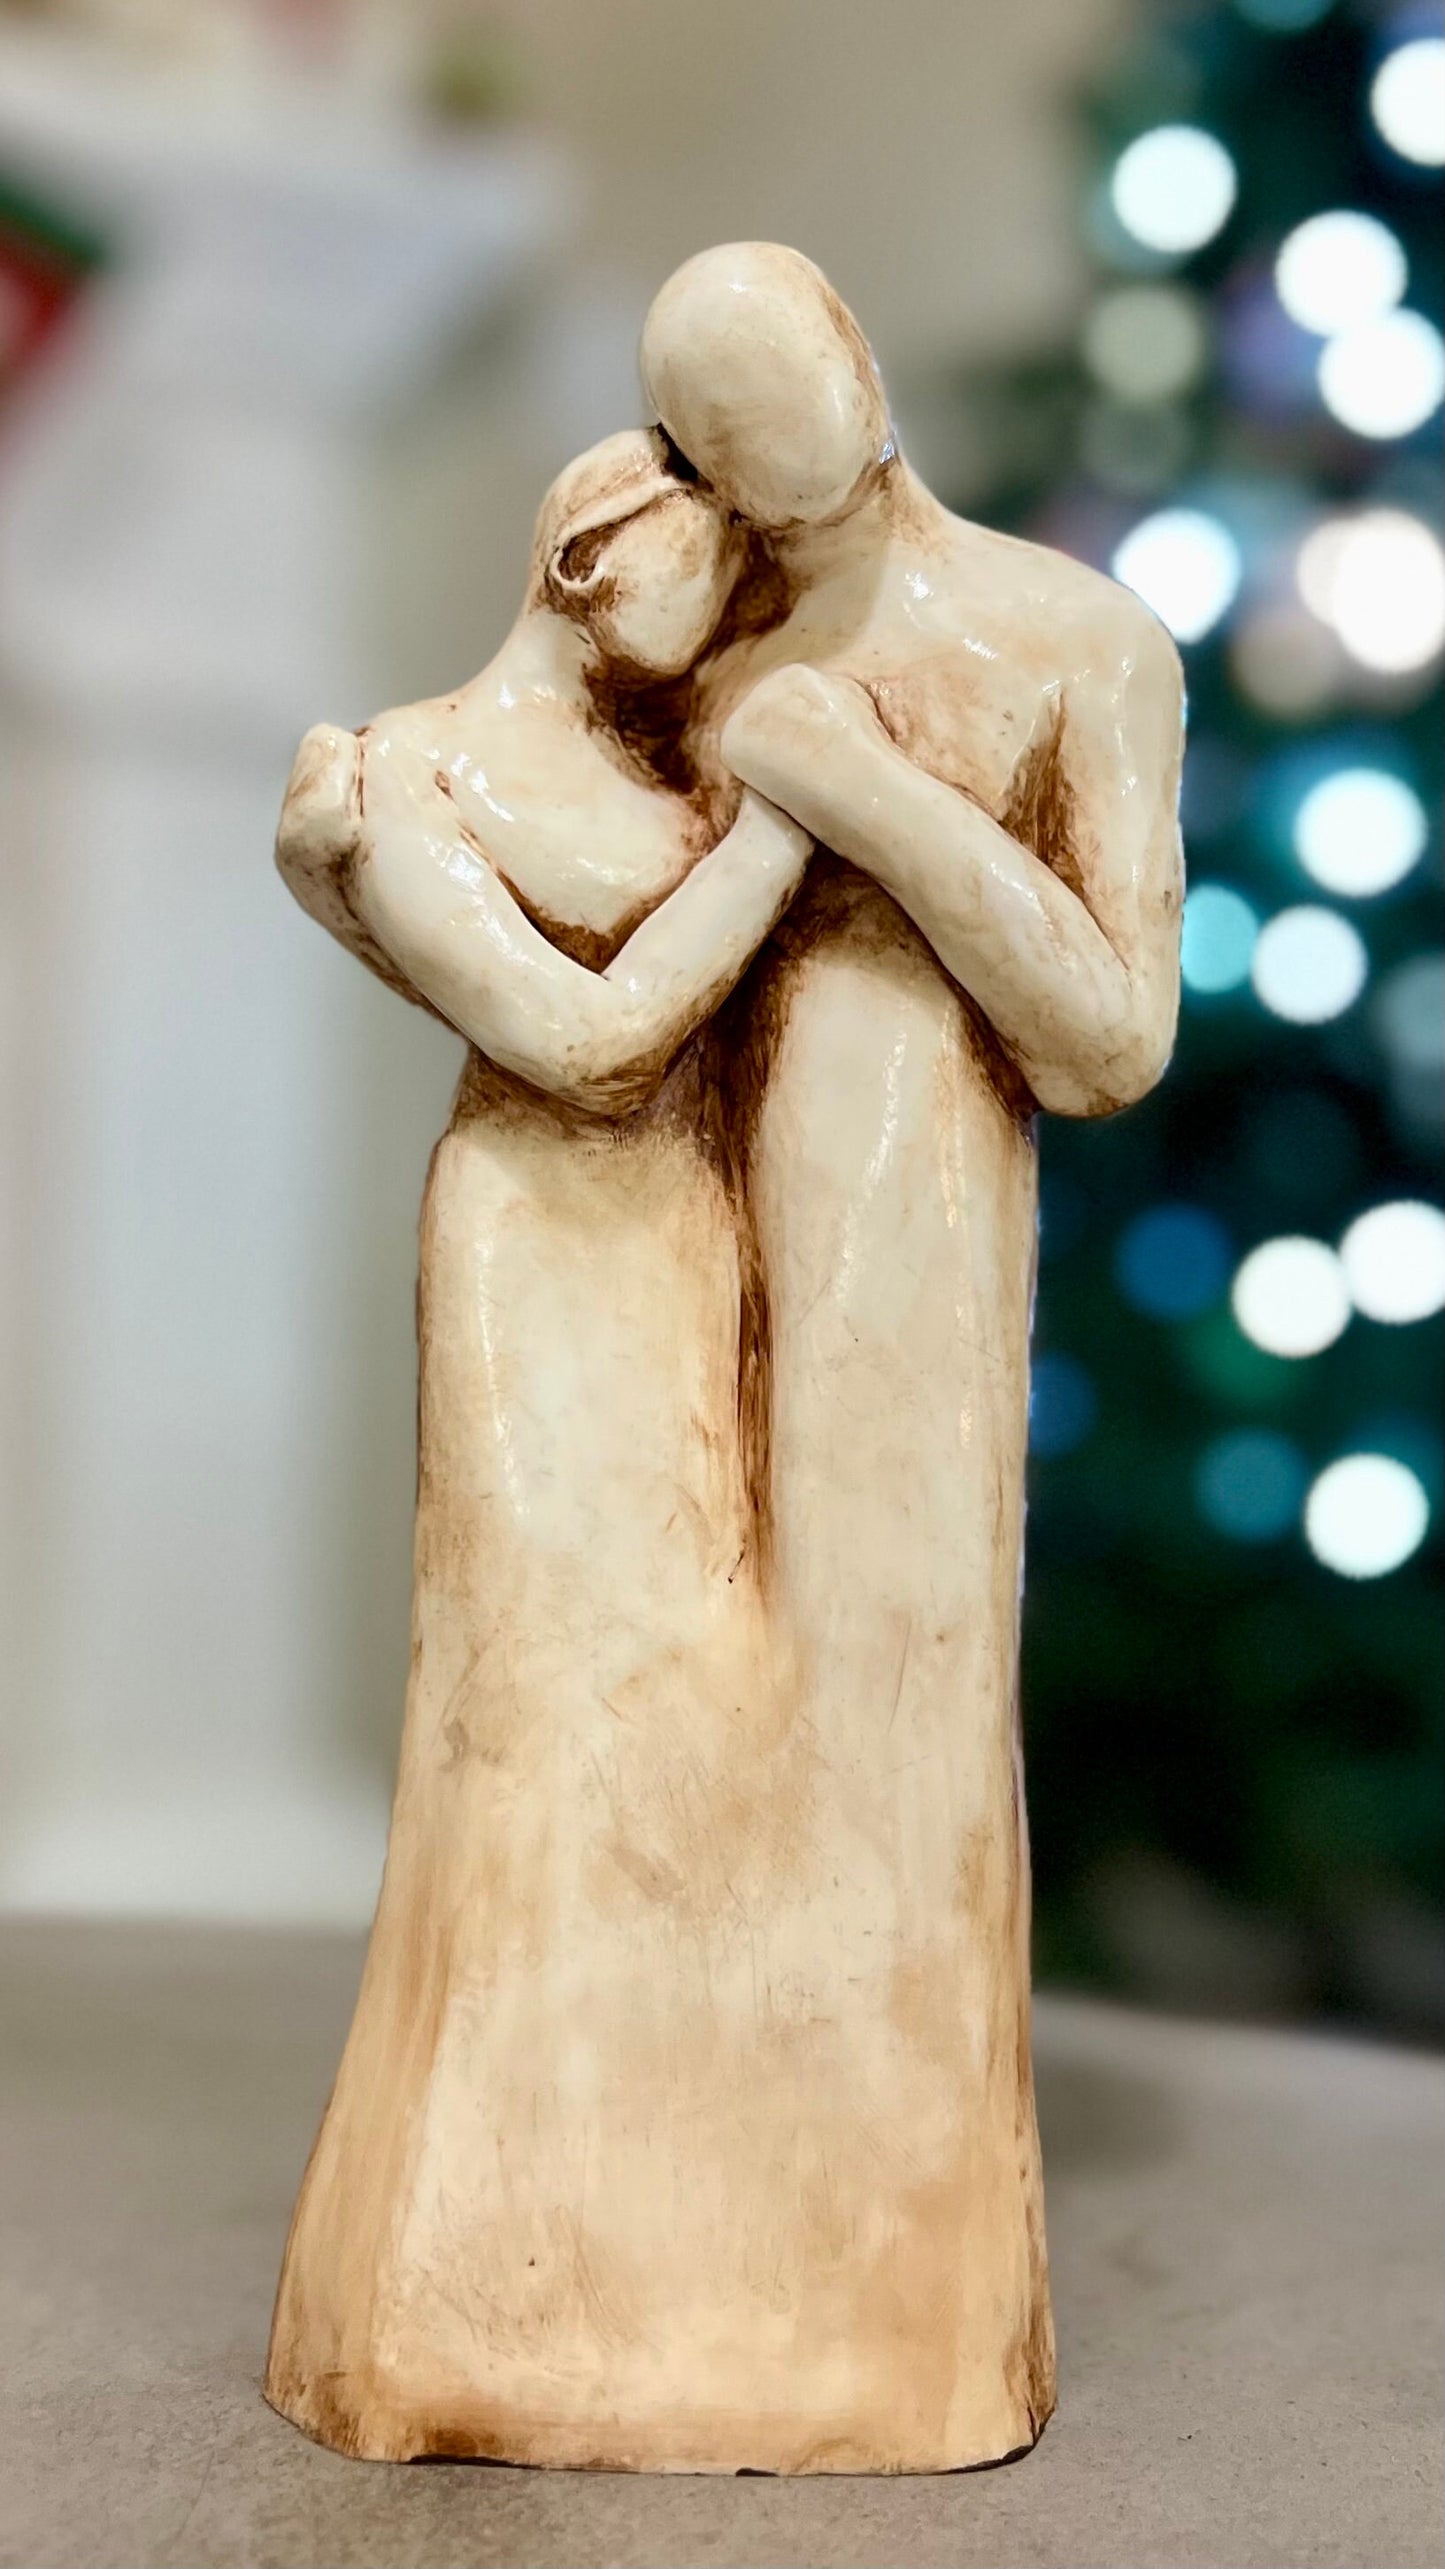 Always & Forever Anniversary Gift Couples Sculpture Figurine